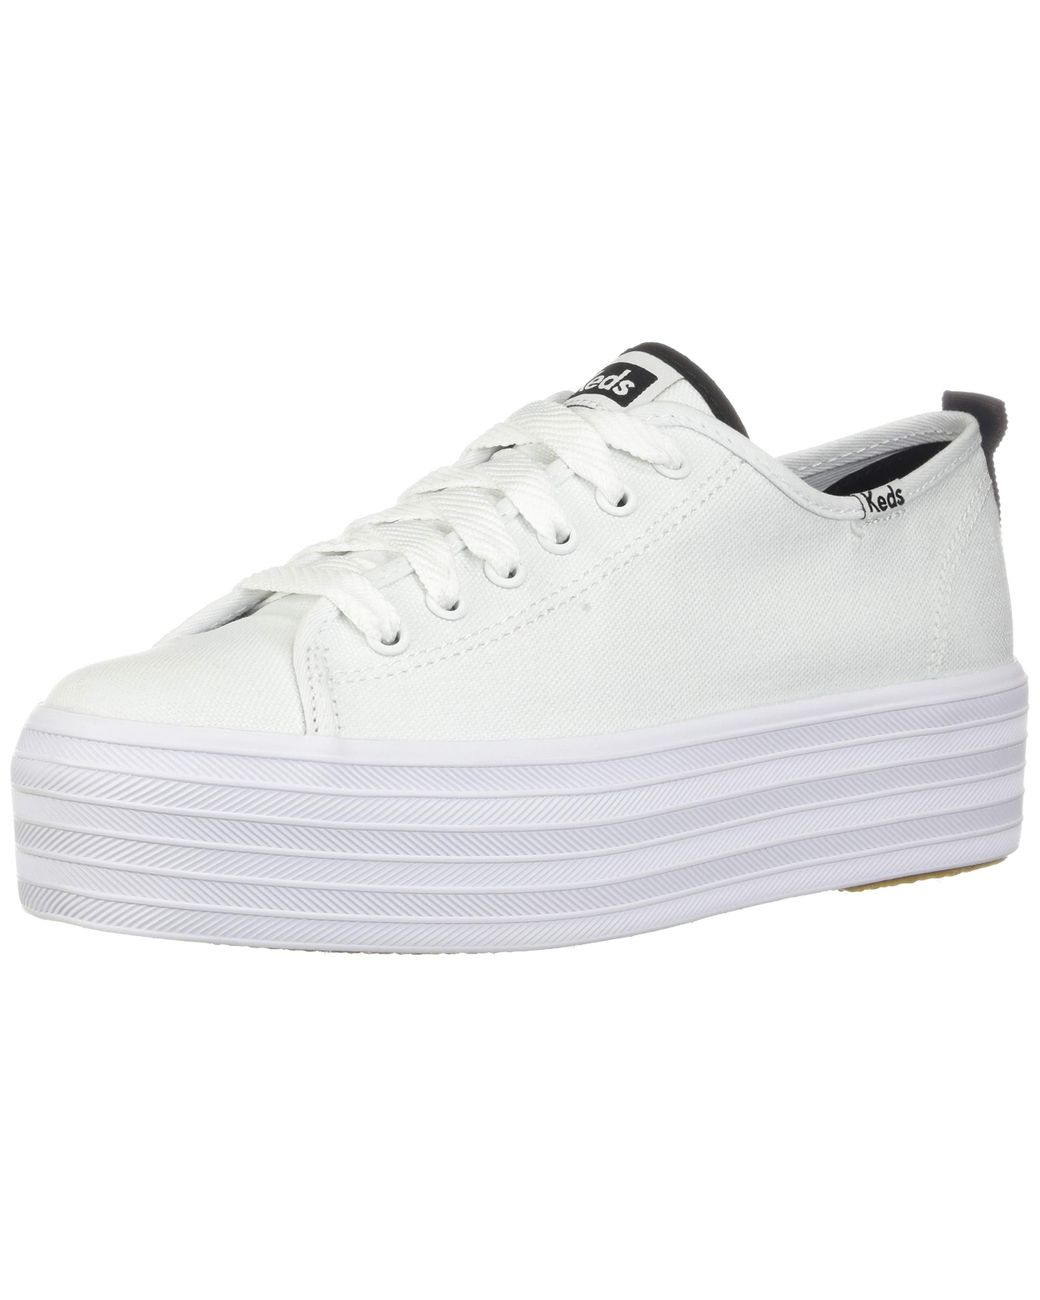 Keds Triple Up Canvas Sneaker in White - Lyst